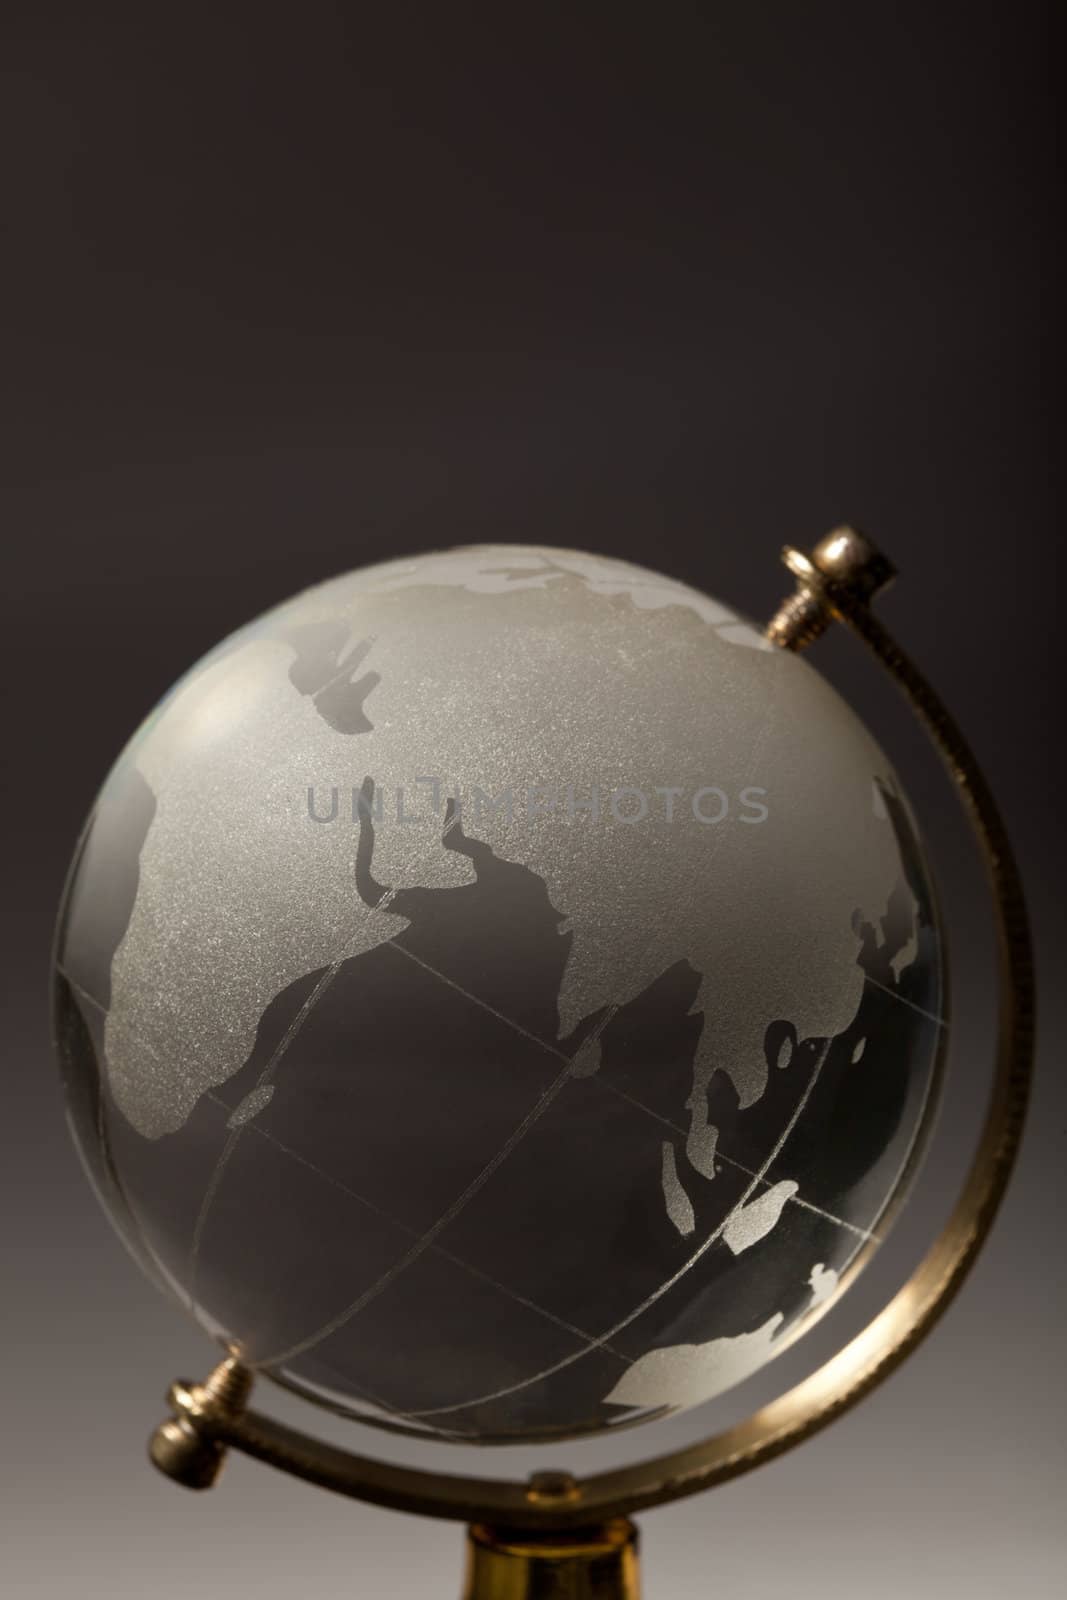 Crystal glass globe on gradient gray background